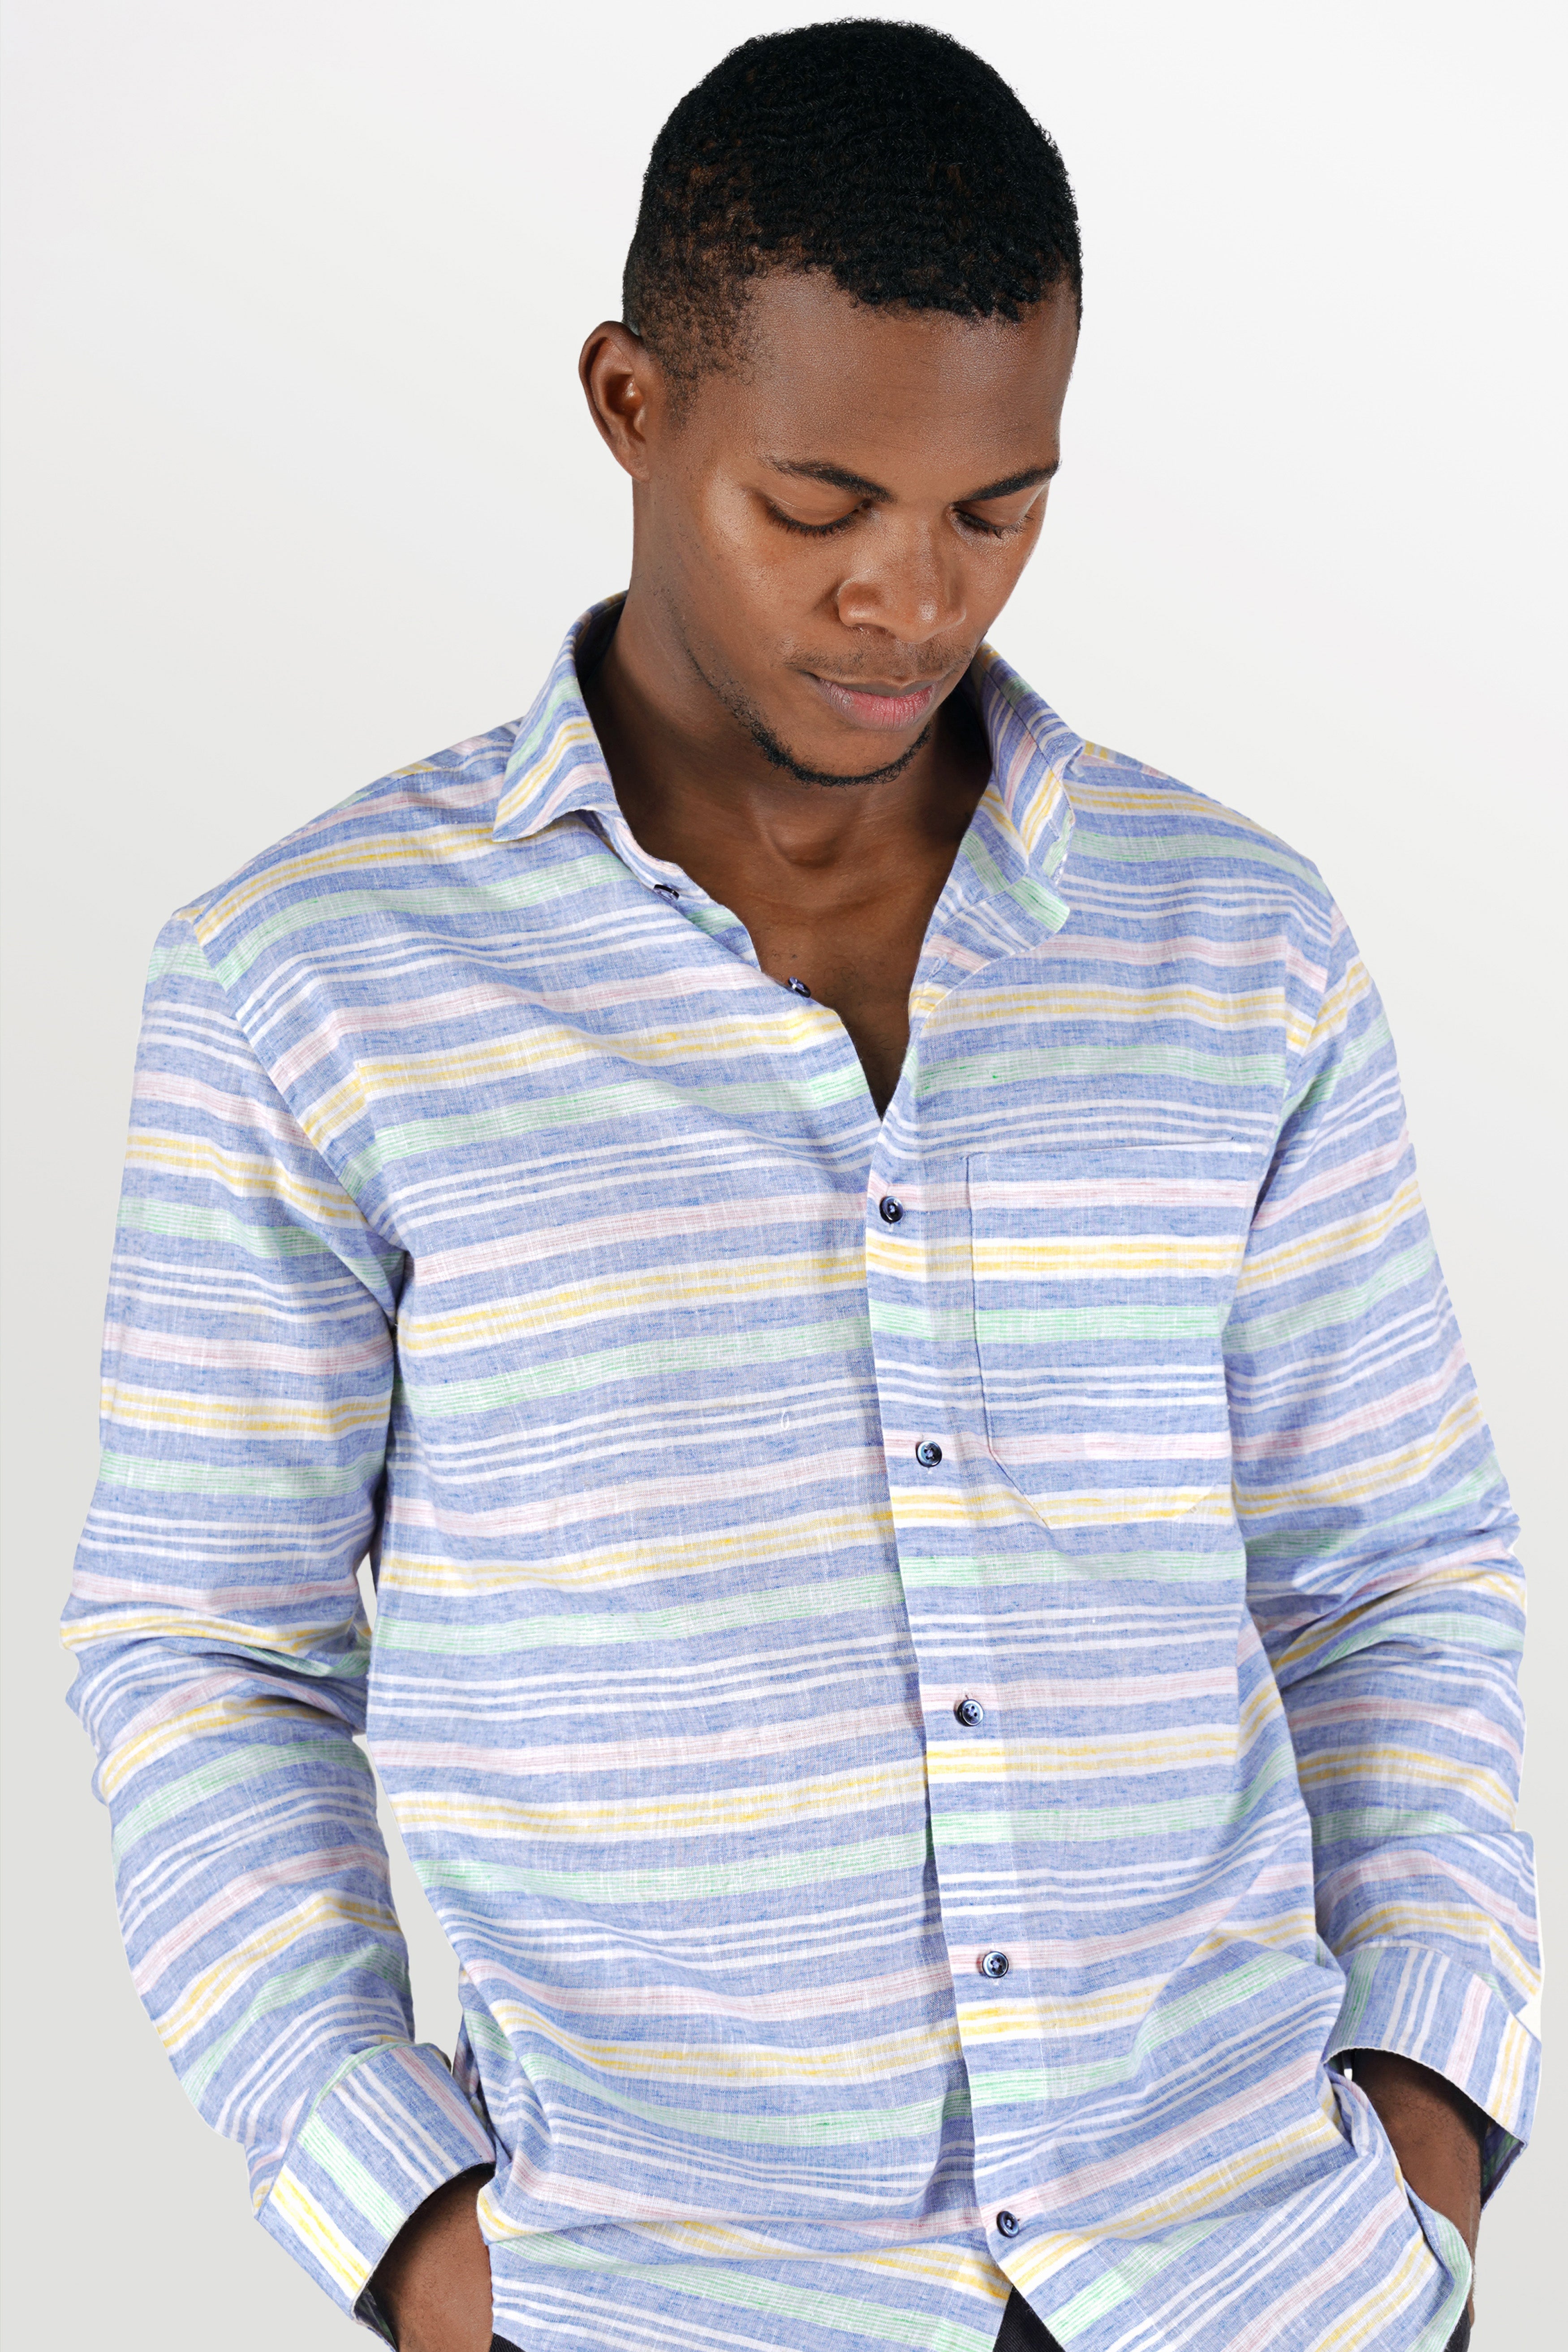 Wistful Blue with Marzipan Yellow Striped Chambray Shirt 10306-CA-BLE-38, 10306-CA-BLE-H-38, 10306-CA-BLE-39, 10306-CA-BLE-H-39, 10306-CA-BLE-40, 10306-CA-BLE-H-40, 10306-CA-BLE-42, 10306-CA-BLE-H-42, 10306-CA-BLE-44, 10306-CA-BLE-H-44, 10306-CA-BLE-46, 10306-CA-BLE-H-46, 10306-CA-BLE-48, 10306-CA-BLE-H-48, 10306-CA-BLE-50, 10306-CA-BLE-H-50, 10306-CA-BLE-52, 10306-CA-BLE-H-52